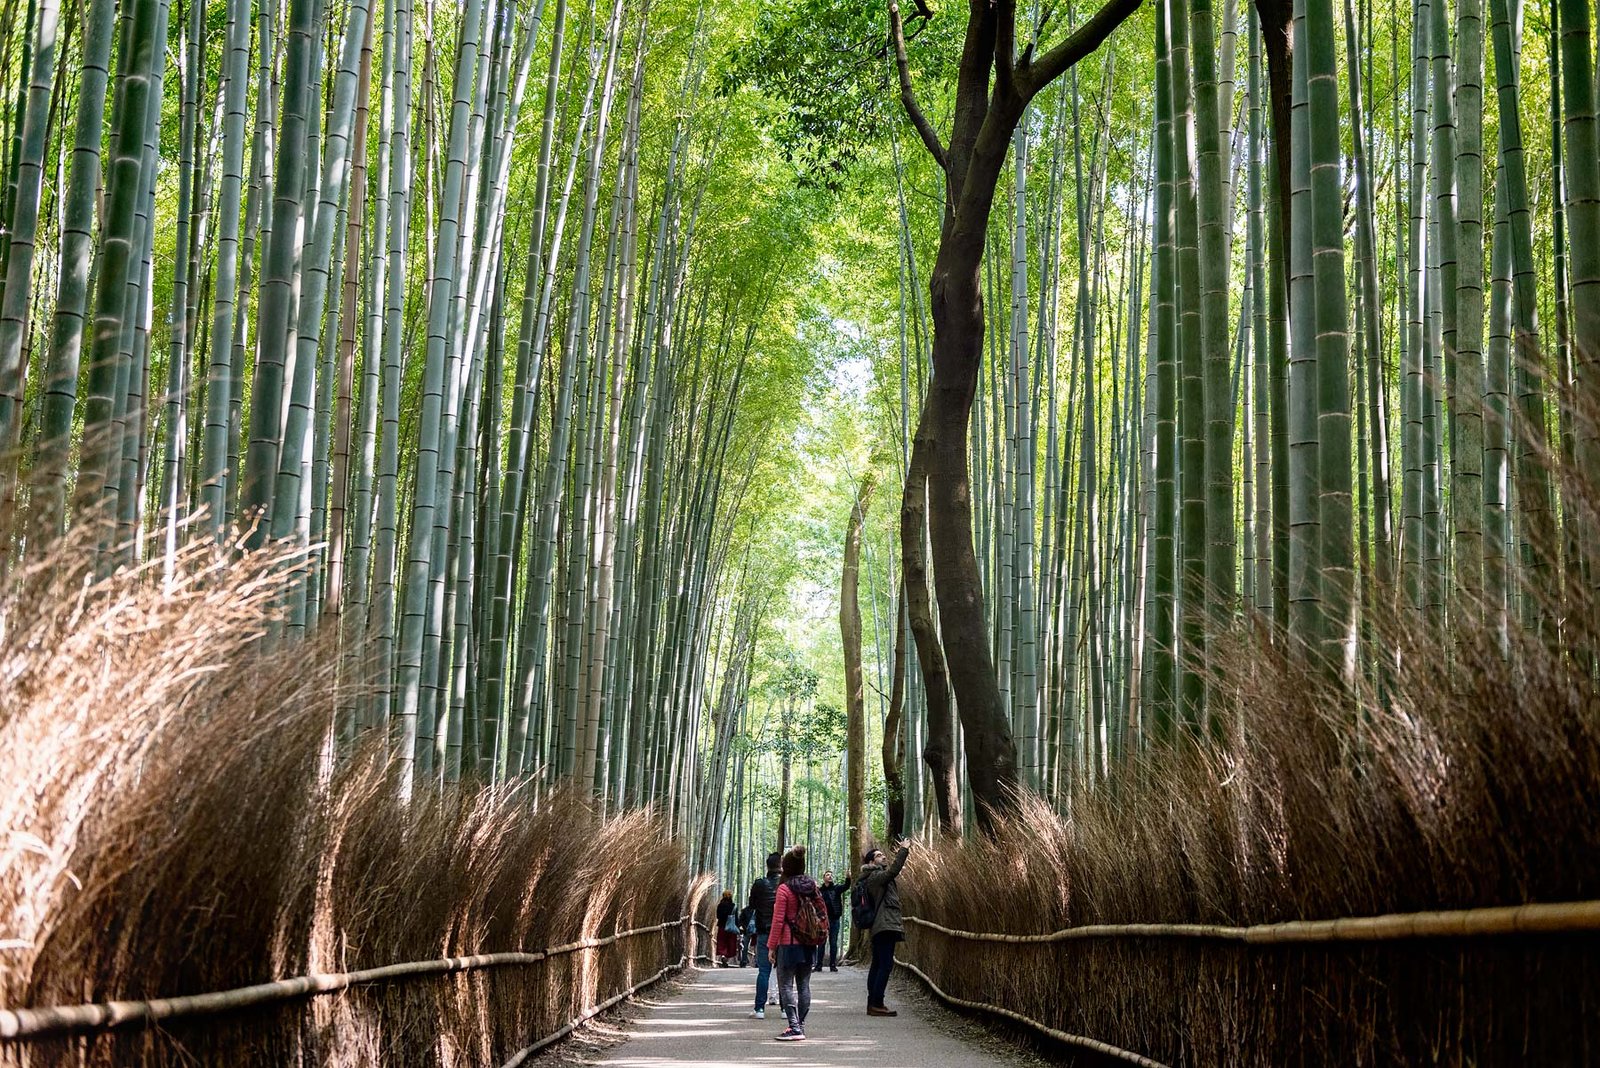 Arashiyama Bamboo Grove in Kyoto. Read more about My 8 Favorite Things to Do and See in Kyoto on Urban Pixxels.